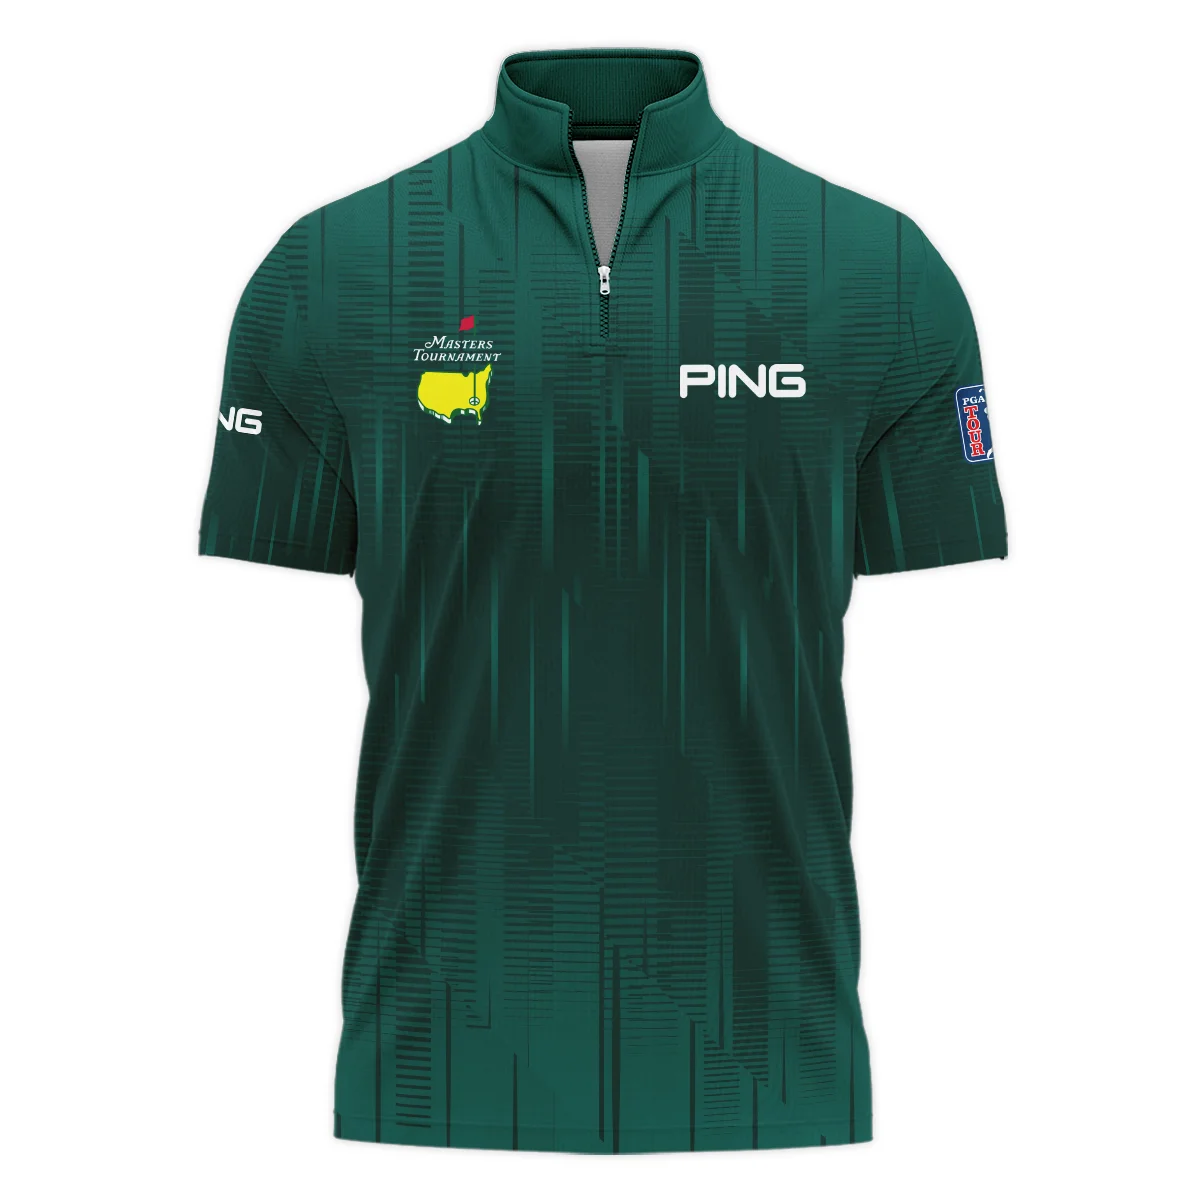 Masters Tournament Ping Dark Green Gradient Stripes Pattern Long Polo Shirt Style Classic Long Polo Shirt For Men